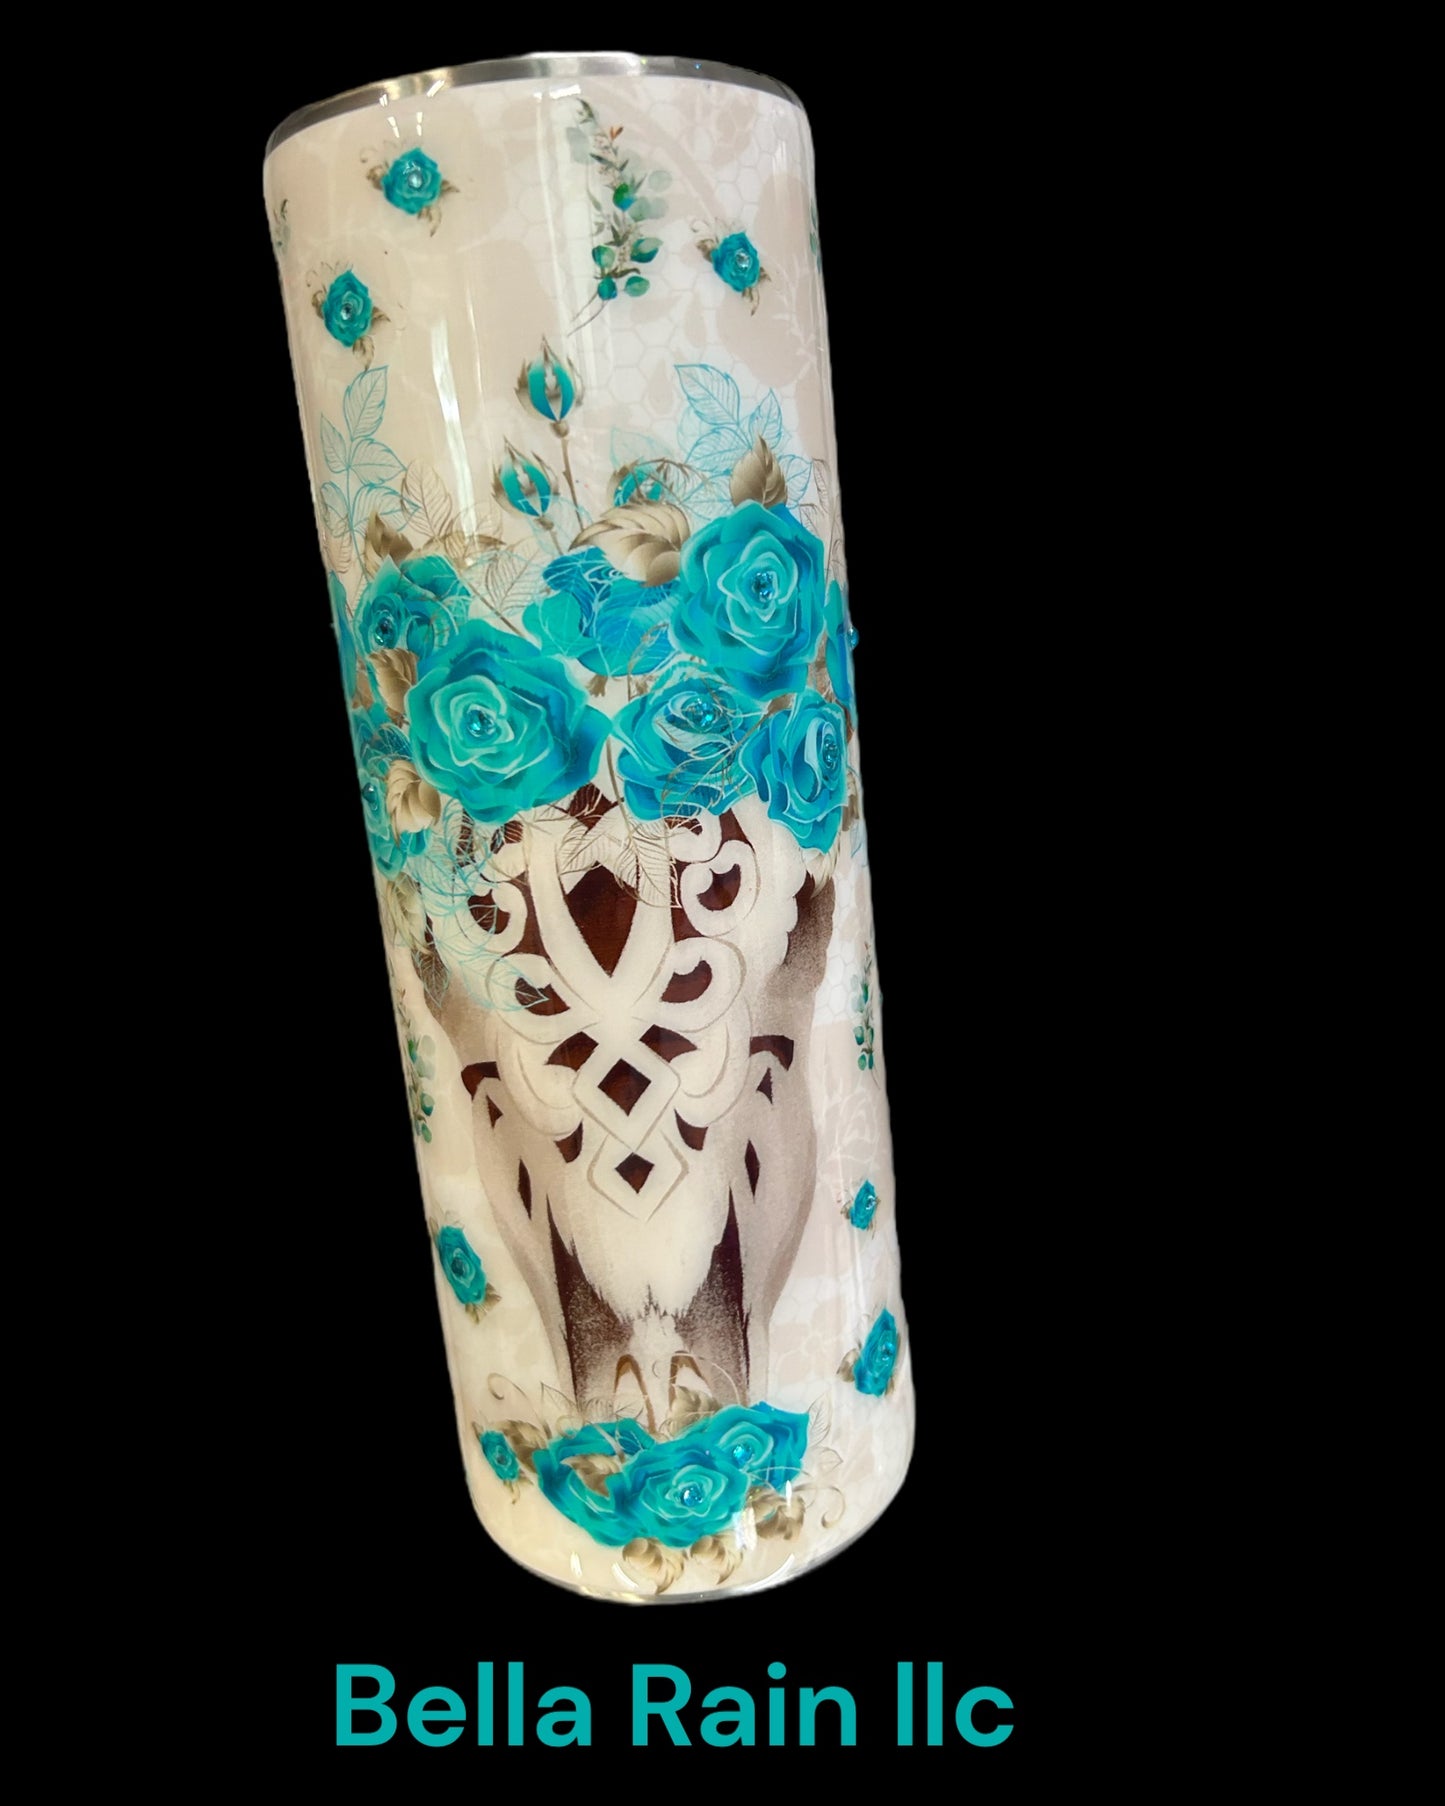 20 oz. BLUE FLORAL STEER SKULL - READY TO SHIP